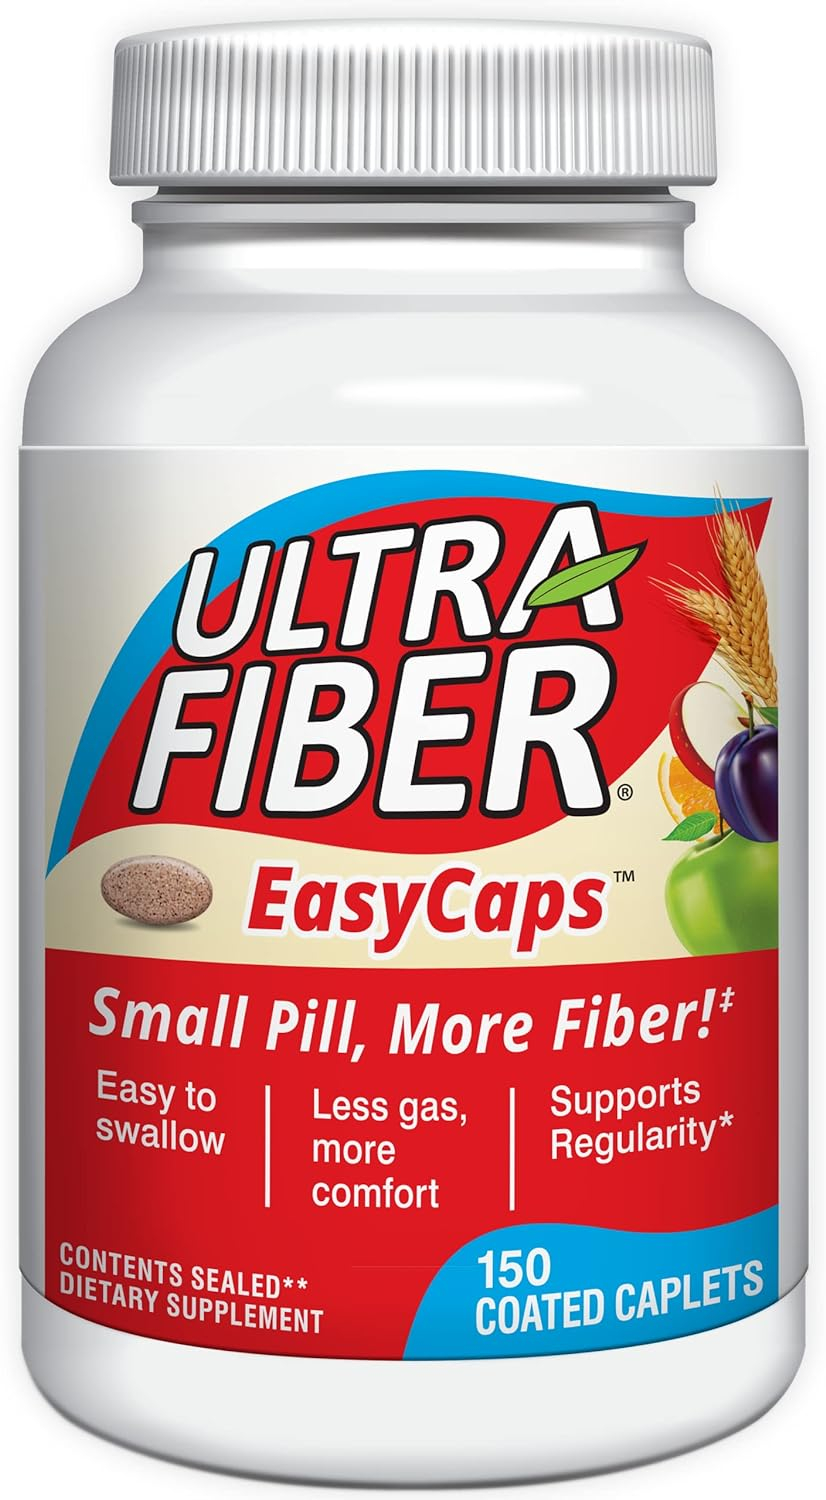 Caplets - The Small Pill with More Fiber - Fiber Support for Regularity – 150ct